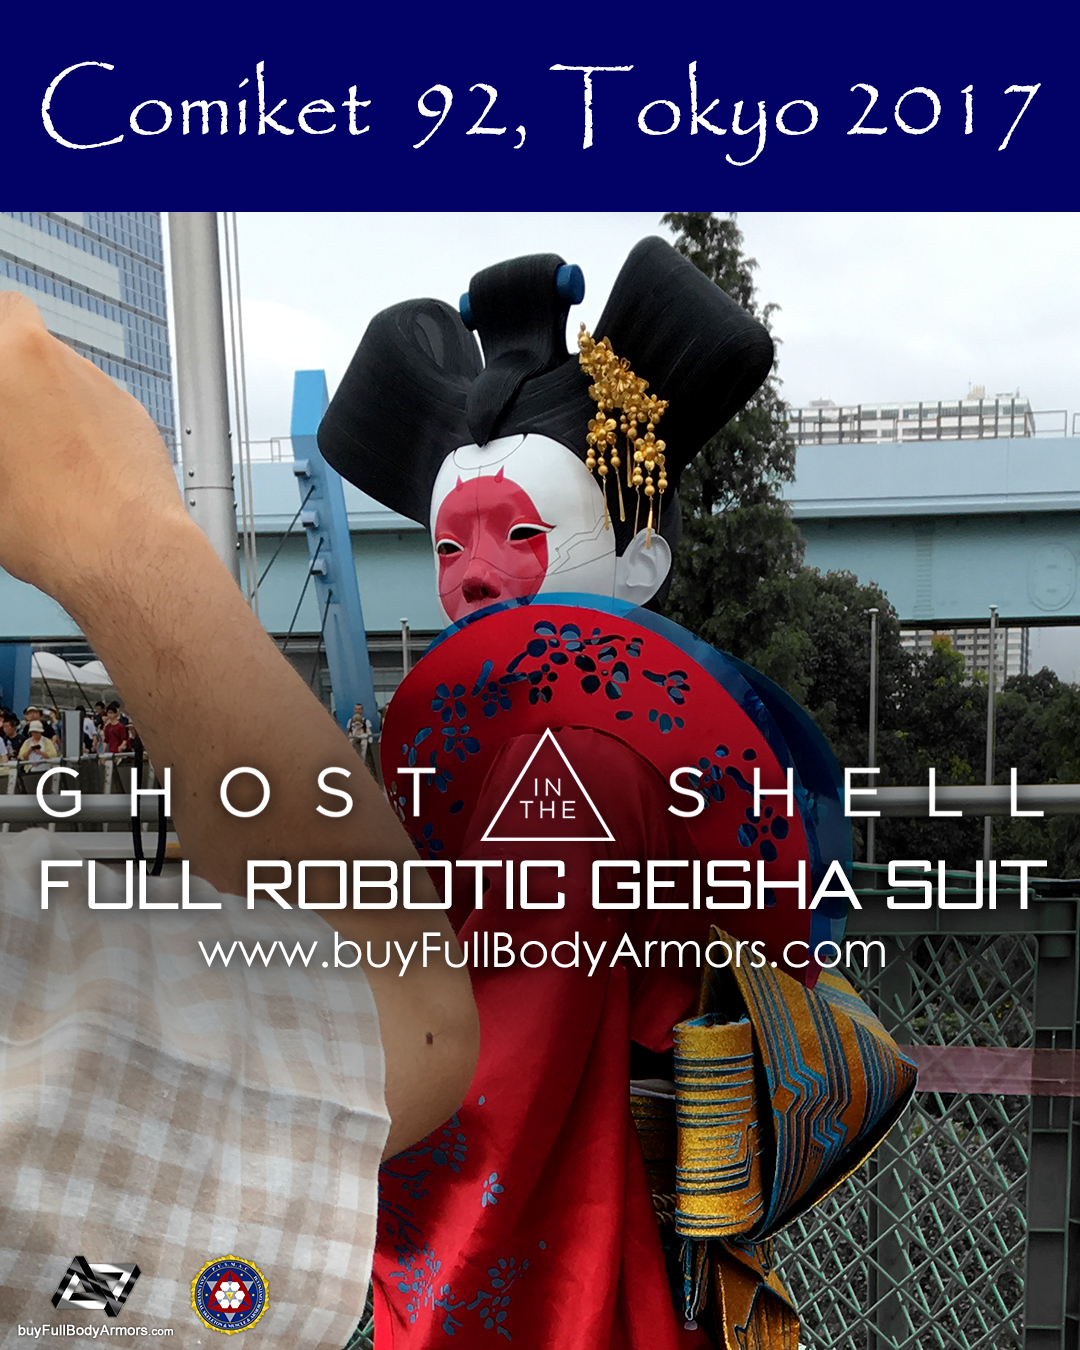 [Comiket 92, Tokyo 2017] The Wearable Robotic Geisha Full Suit from the Movie Ghost in the Shell 2017 3